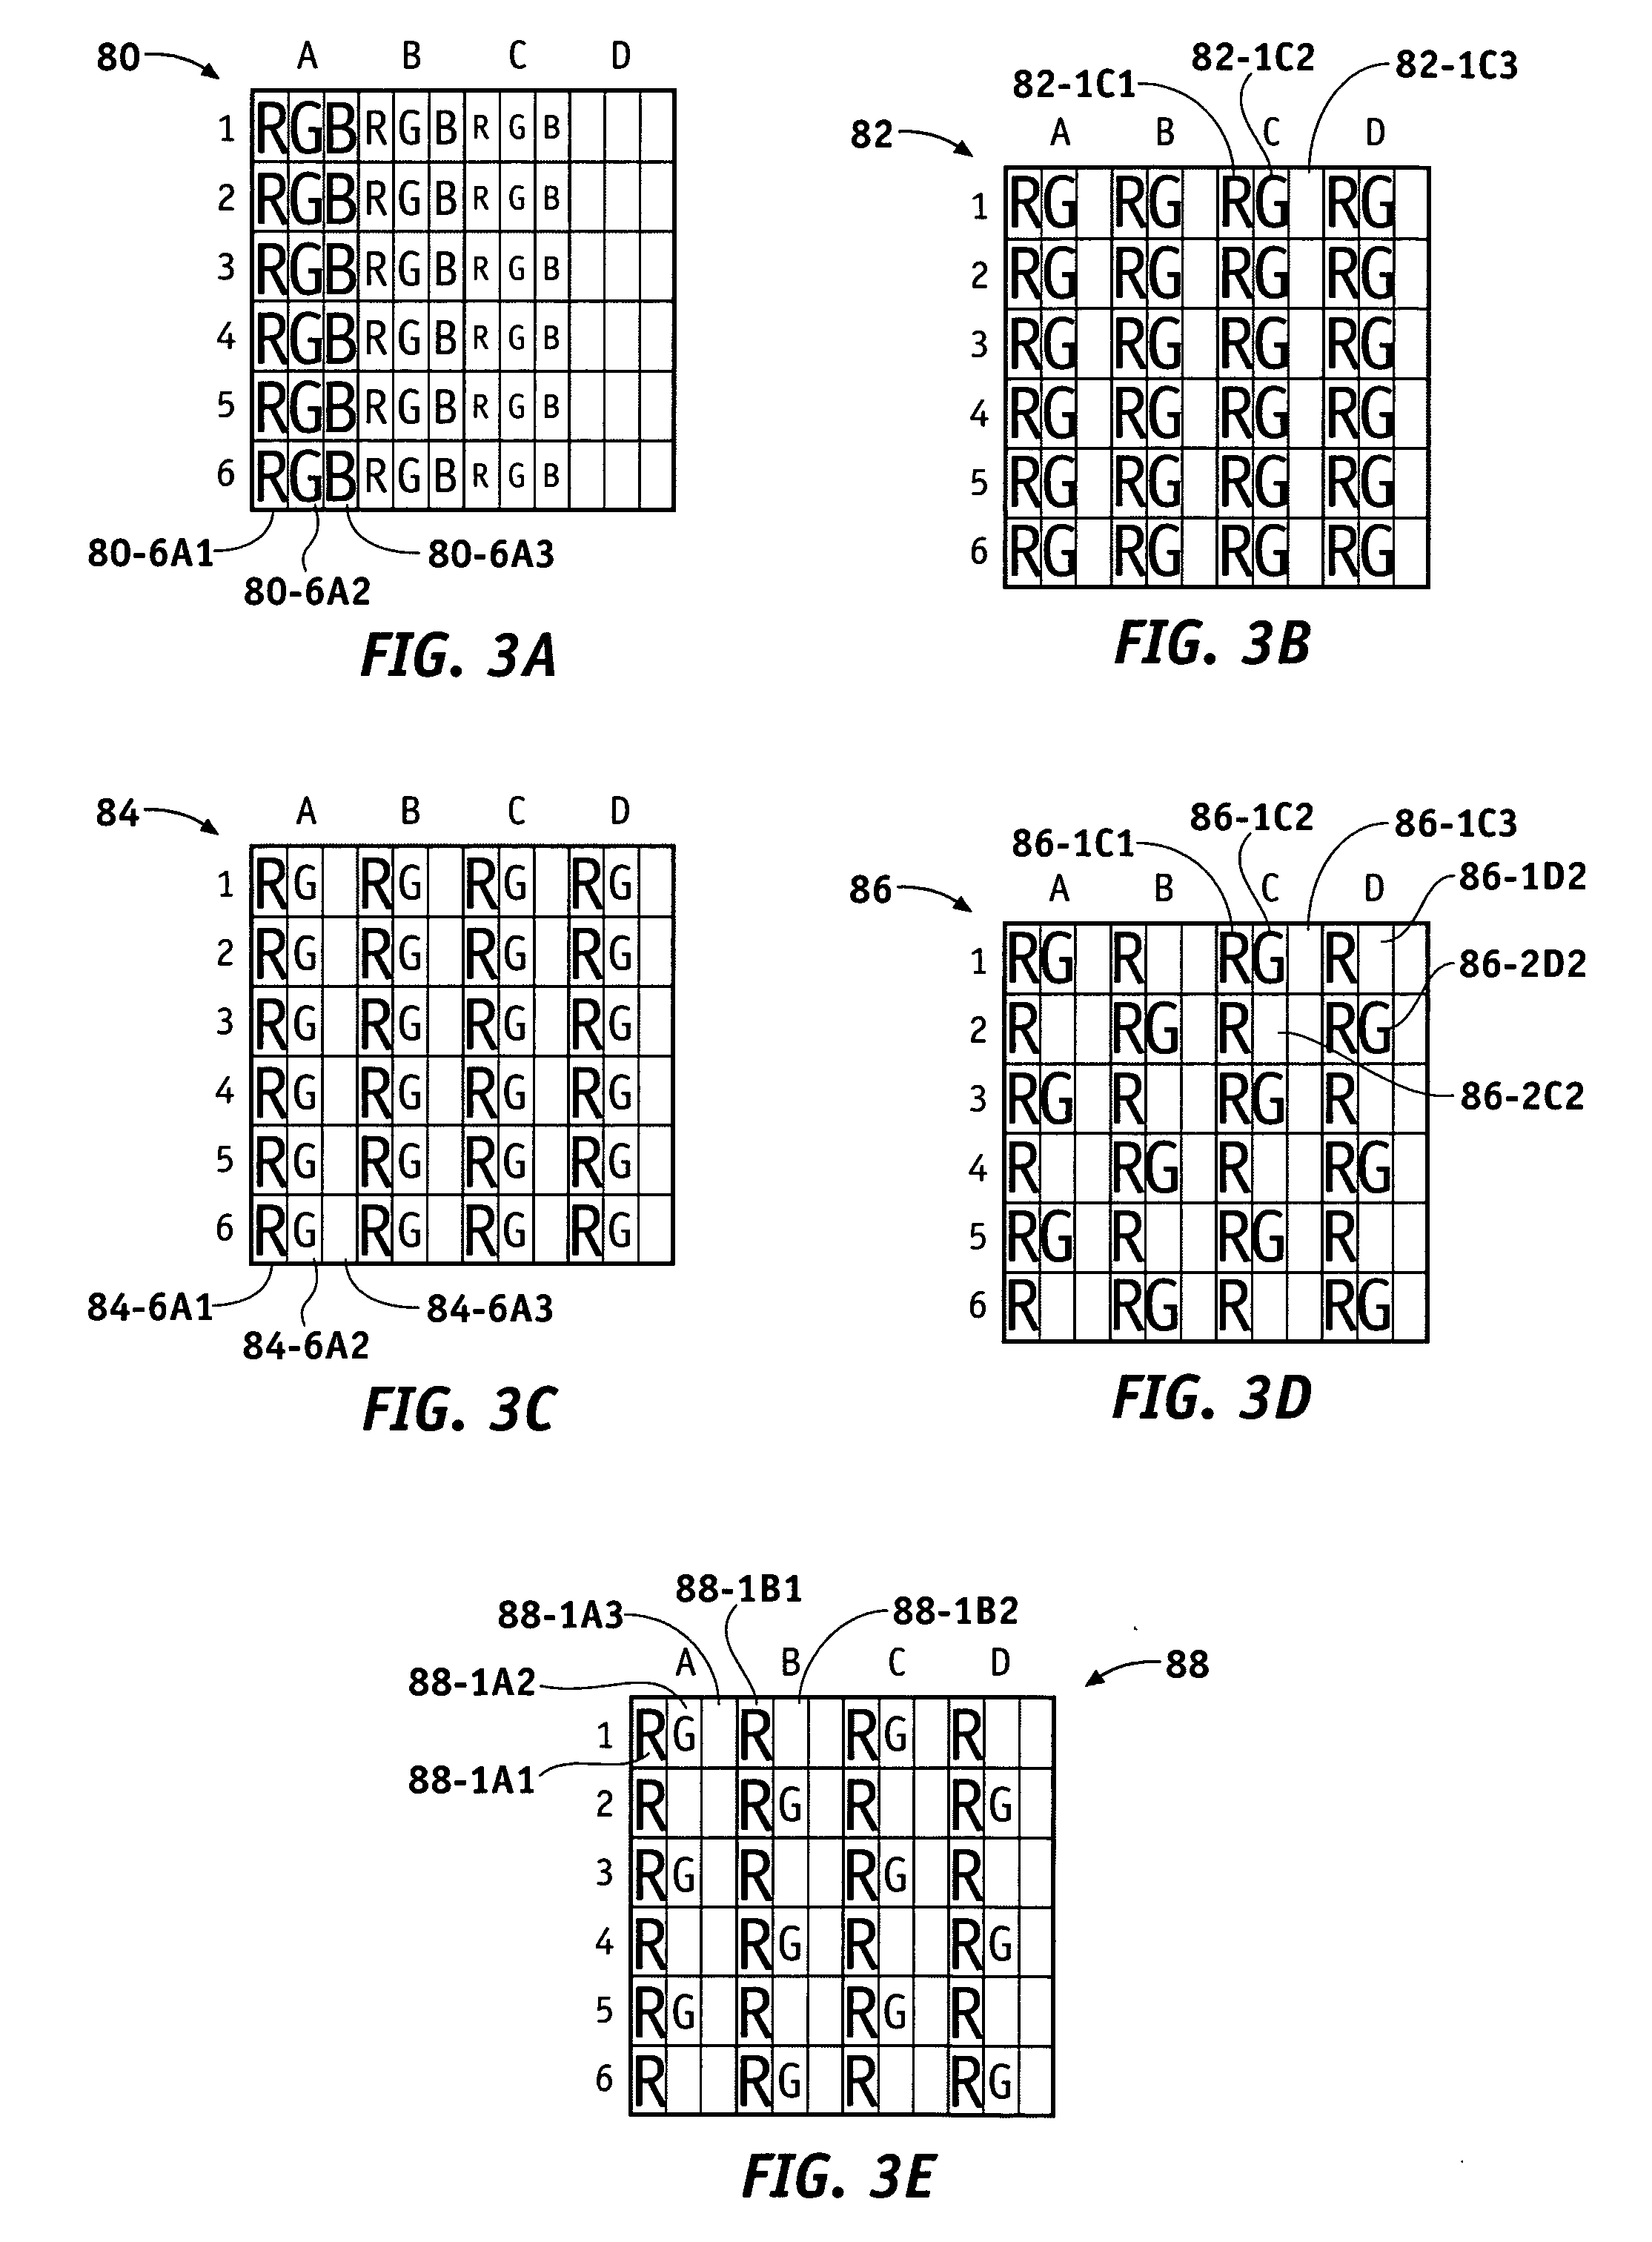 Liquid crystal color display system and method